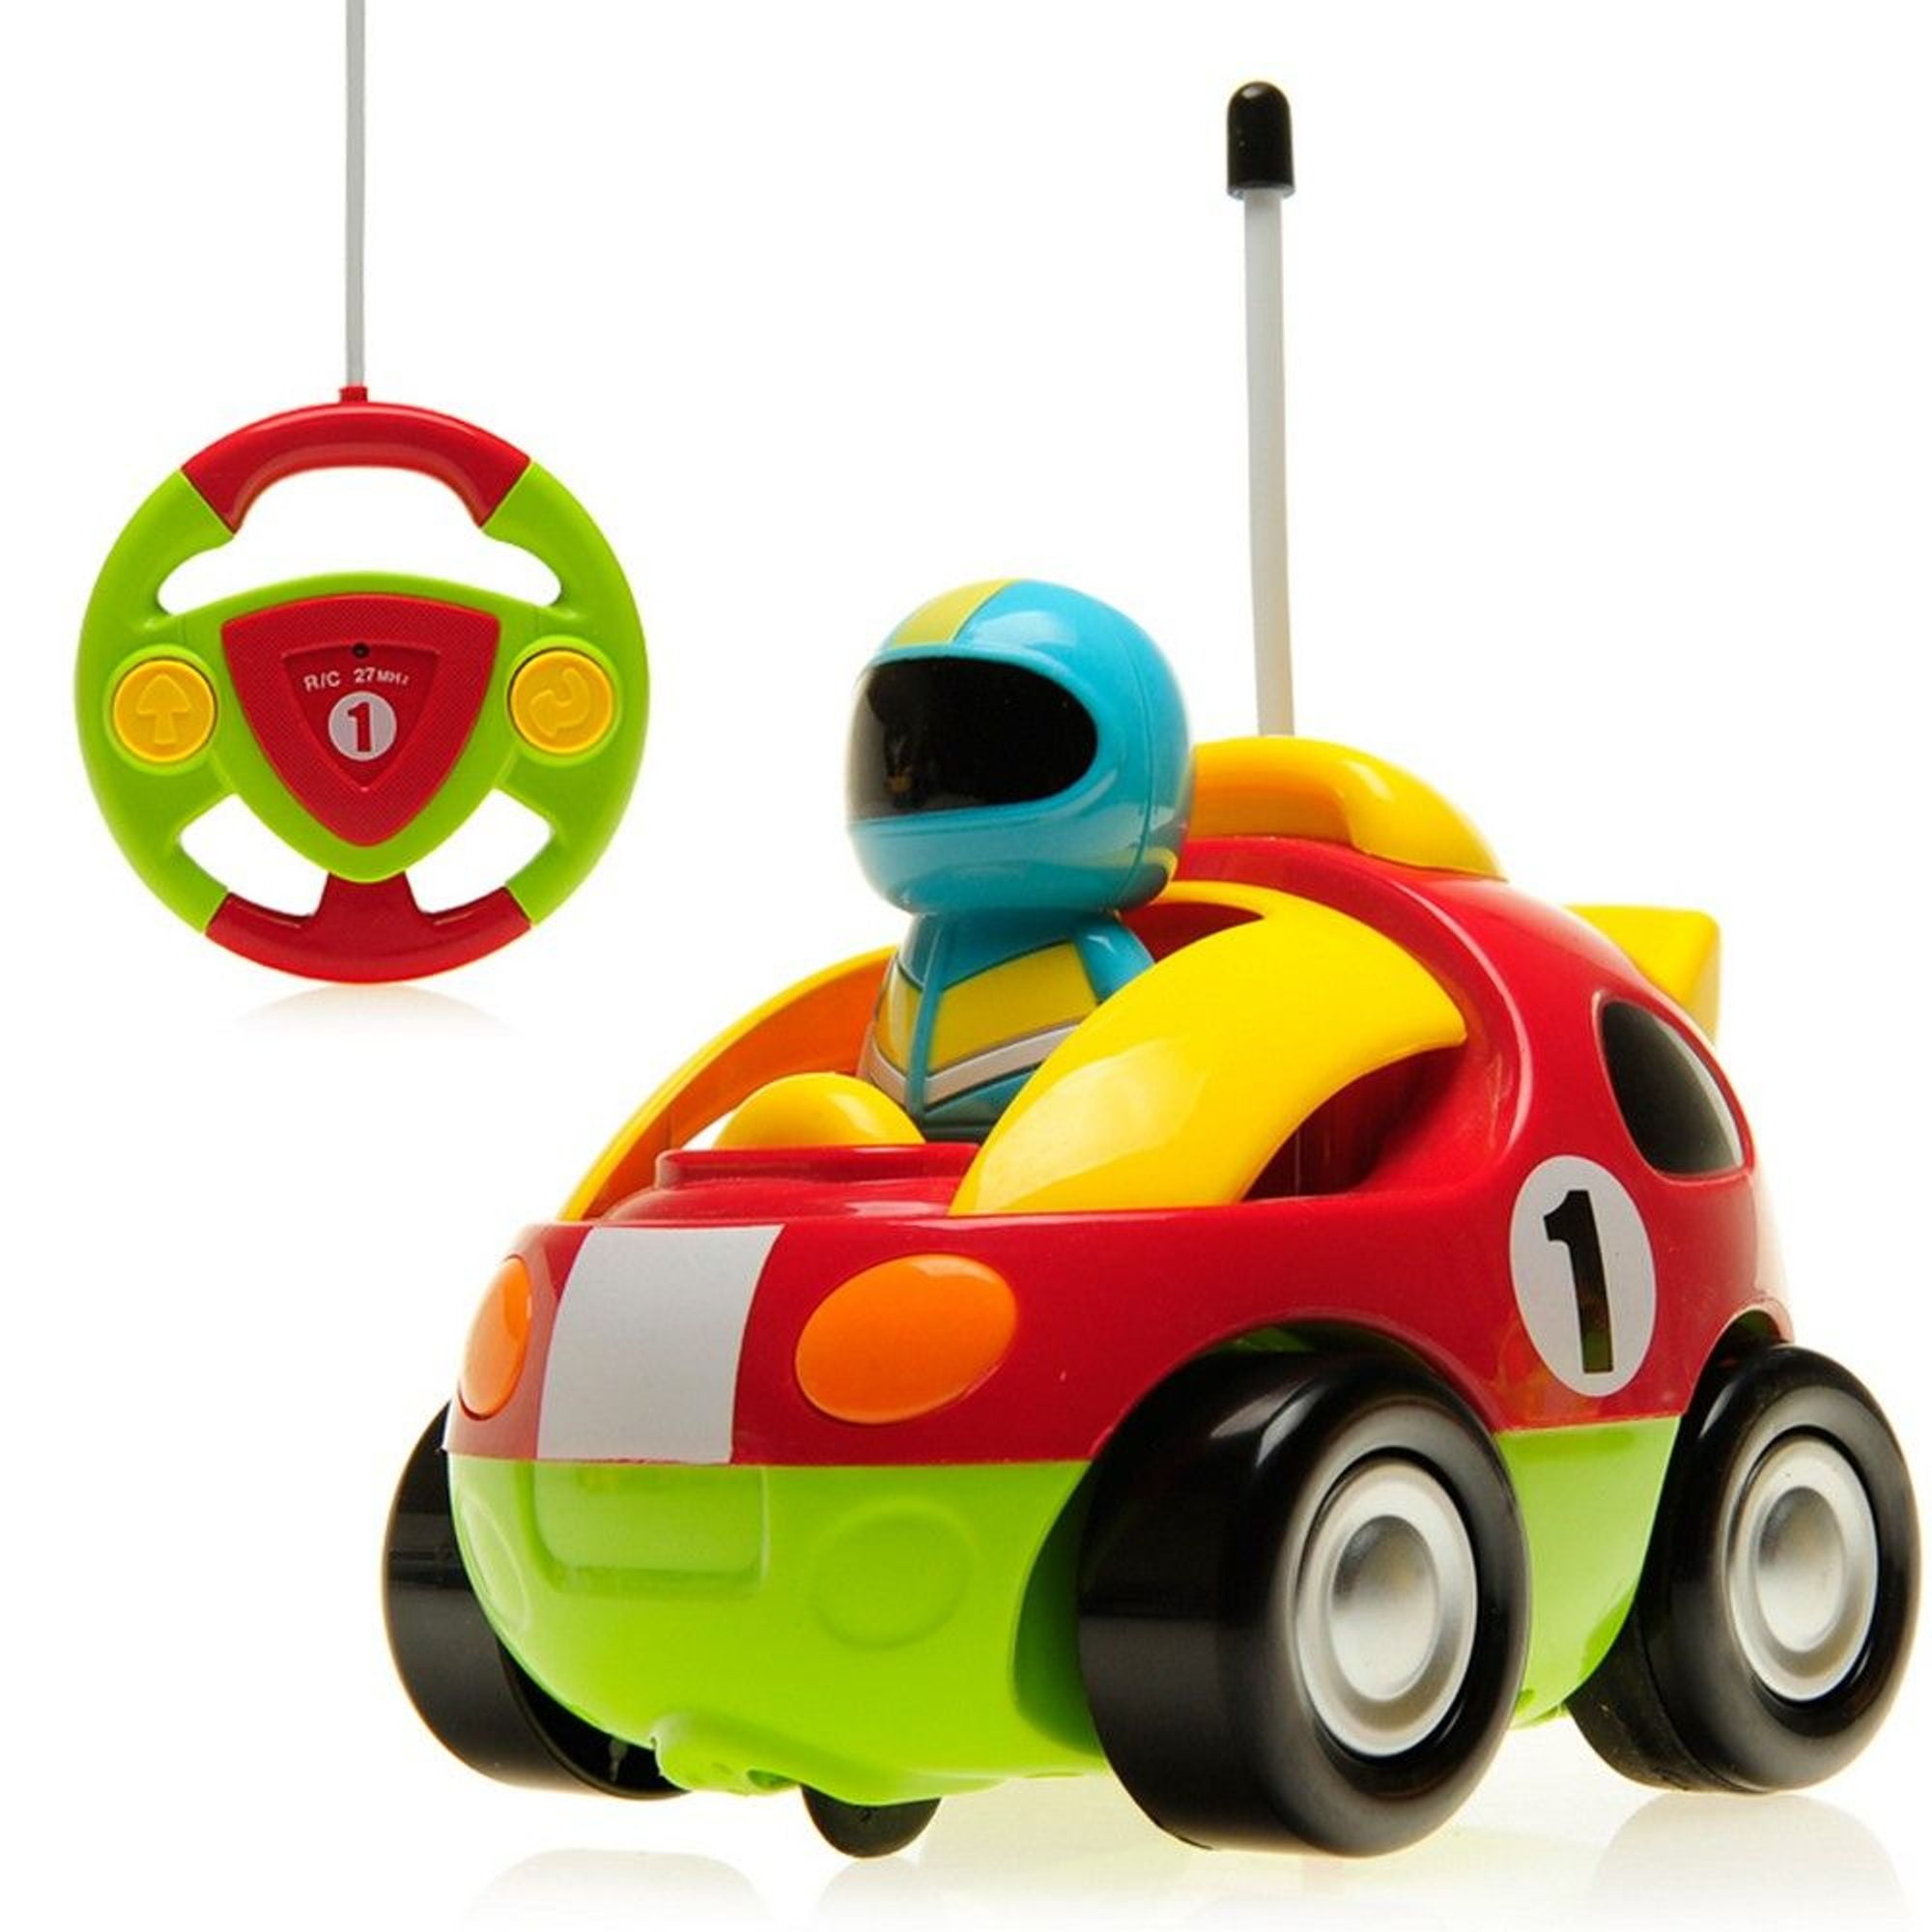 Blue 4" Cartoon RC Formula Race Car Remote Control Toy For Toddlers 